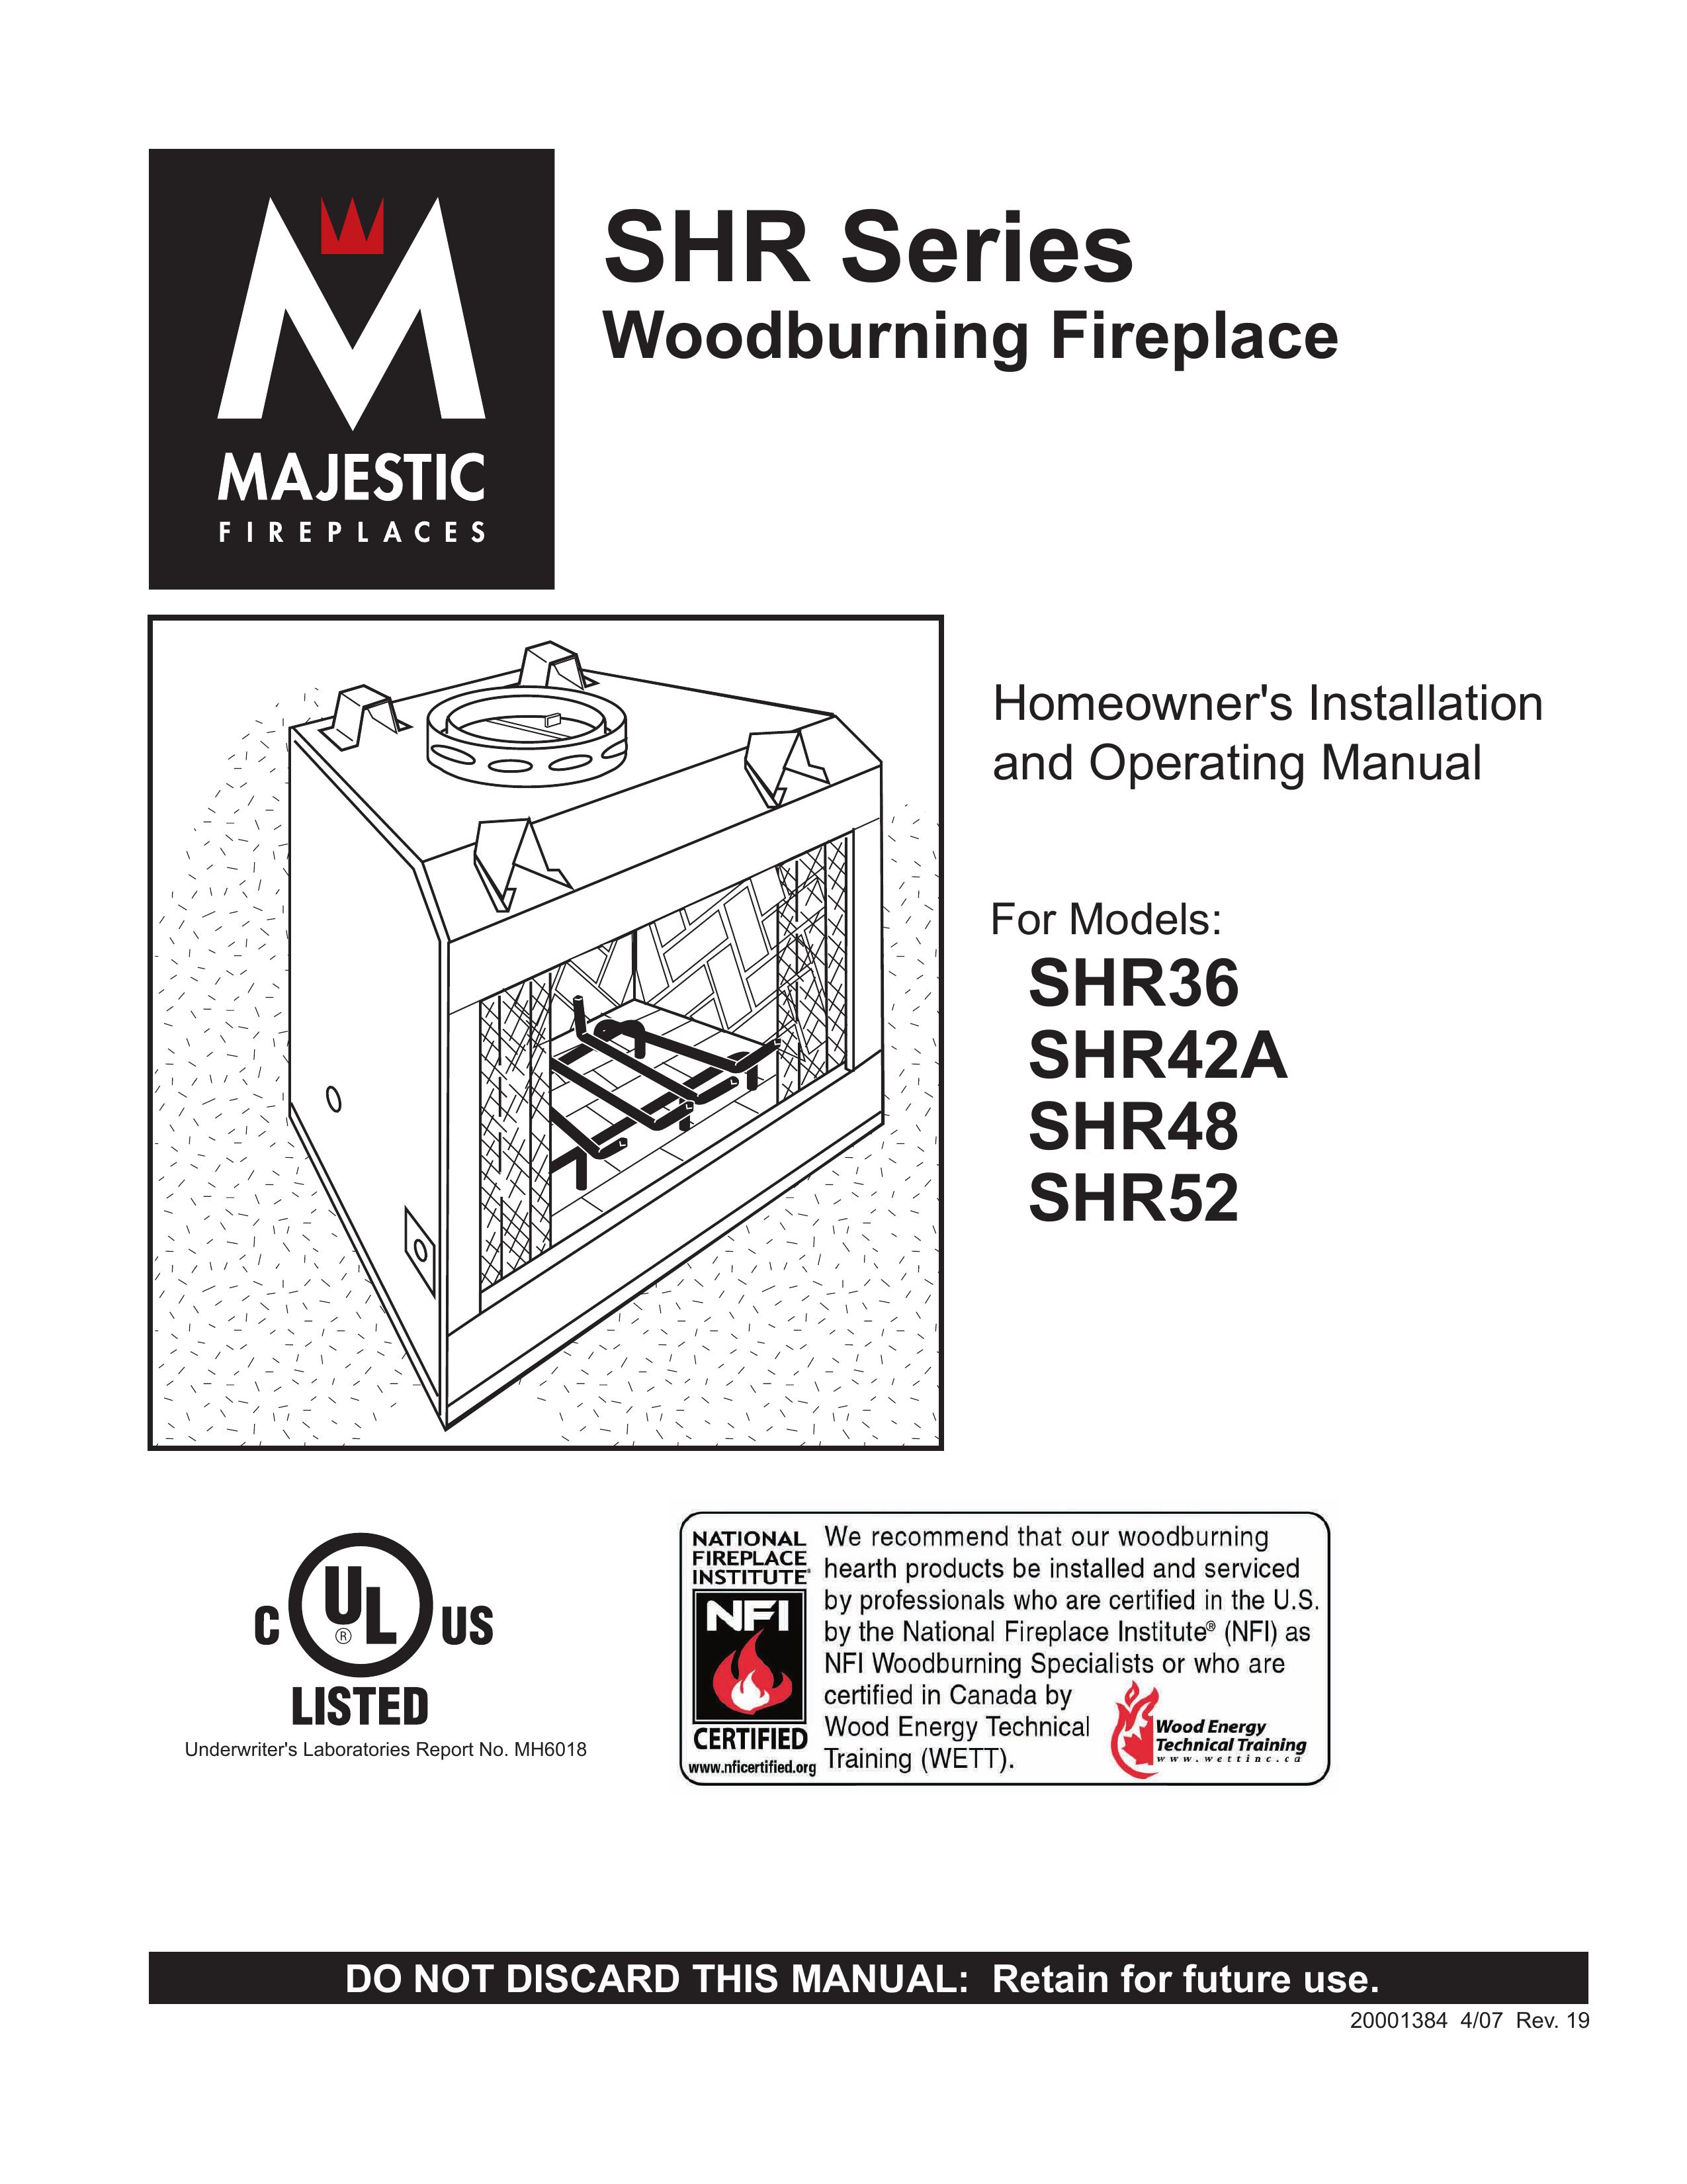 CFM Corporation SHR42A Outdoor Fireplace User Manual